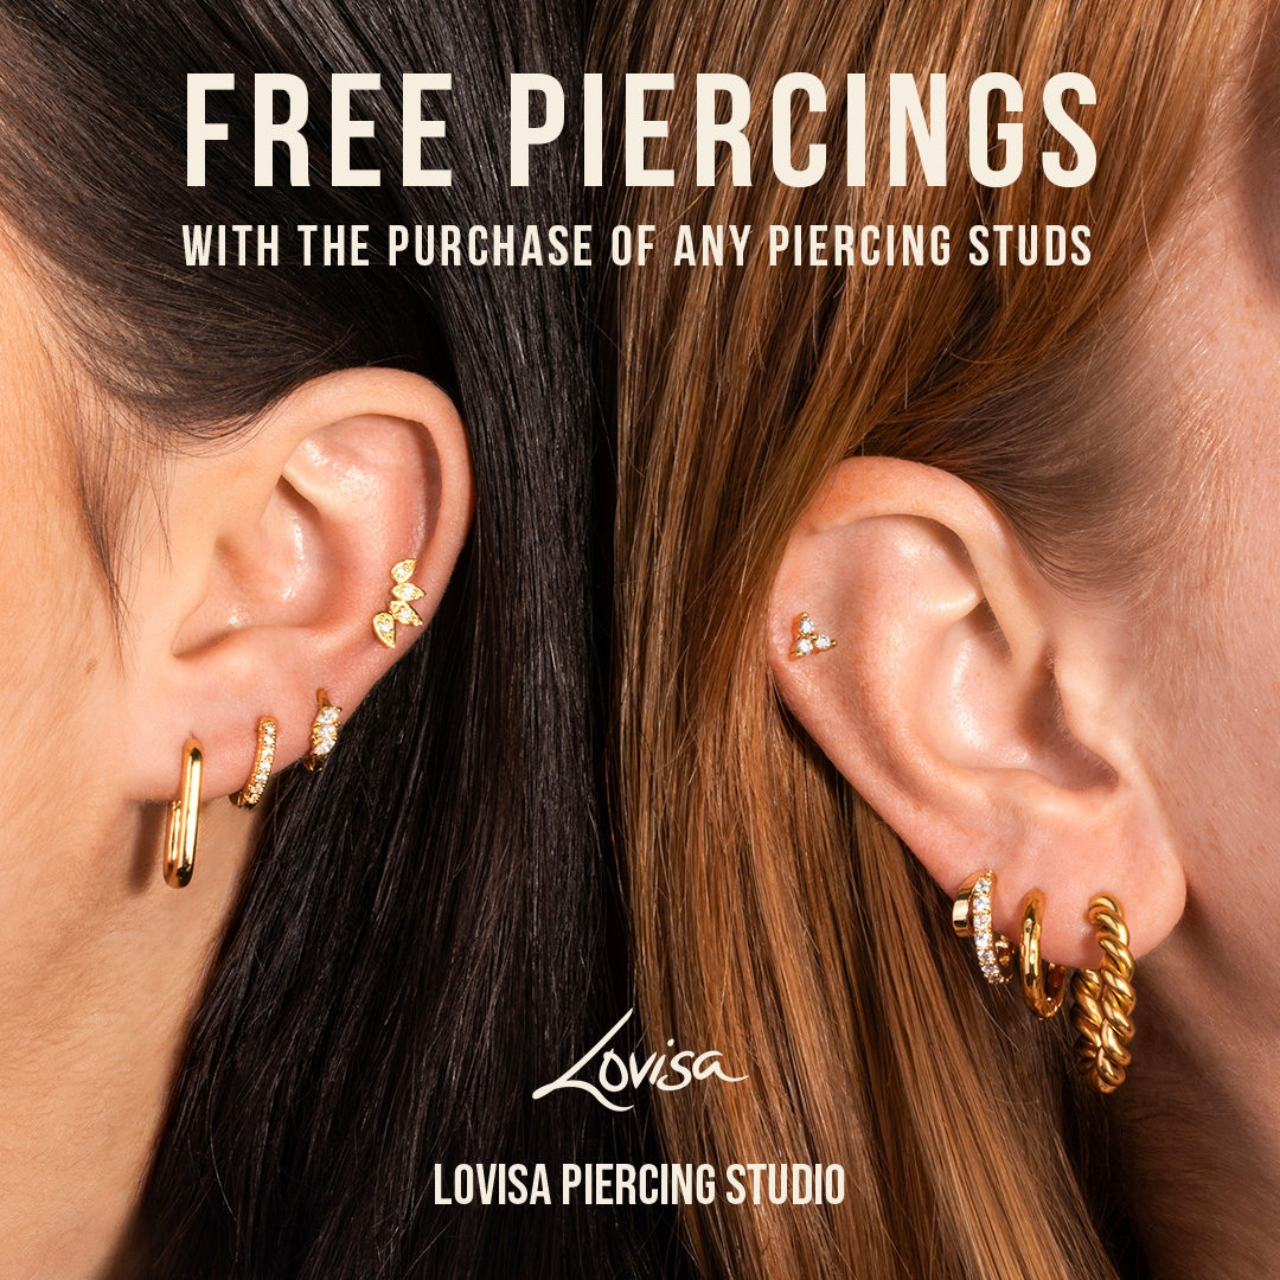 Lovisa Campaign 7 Free Piercings with the Purchase of Any Piercing Studs EN 1280x1280 1